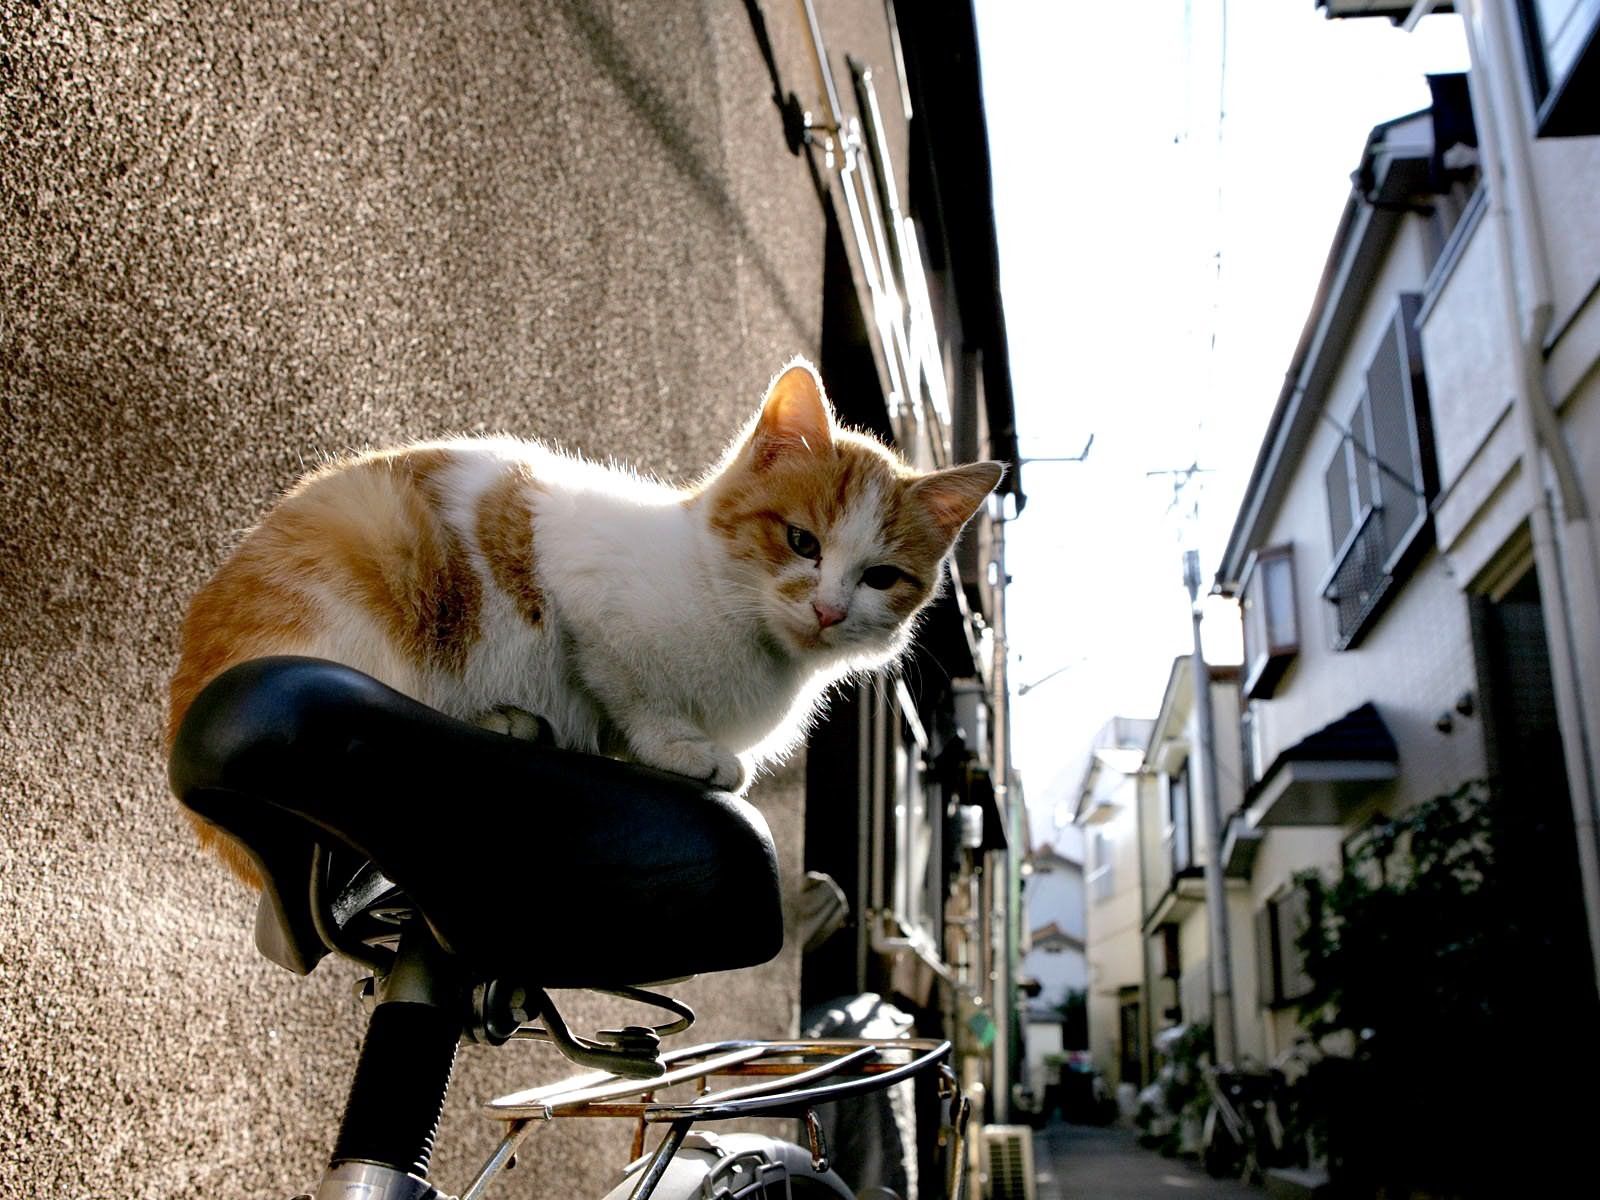 52737 download wallpaper kitten, animals, cat, kitty, bicycle screensavers and pictures for free